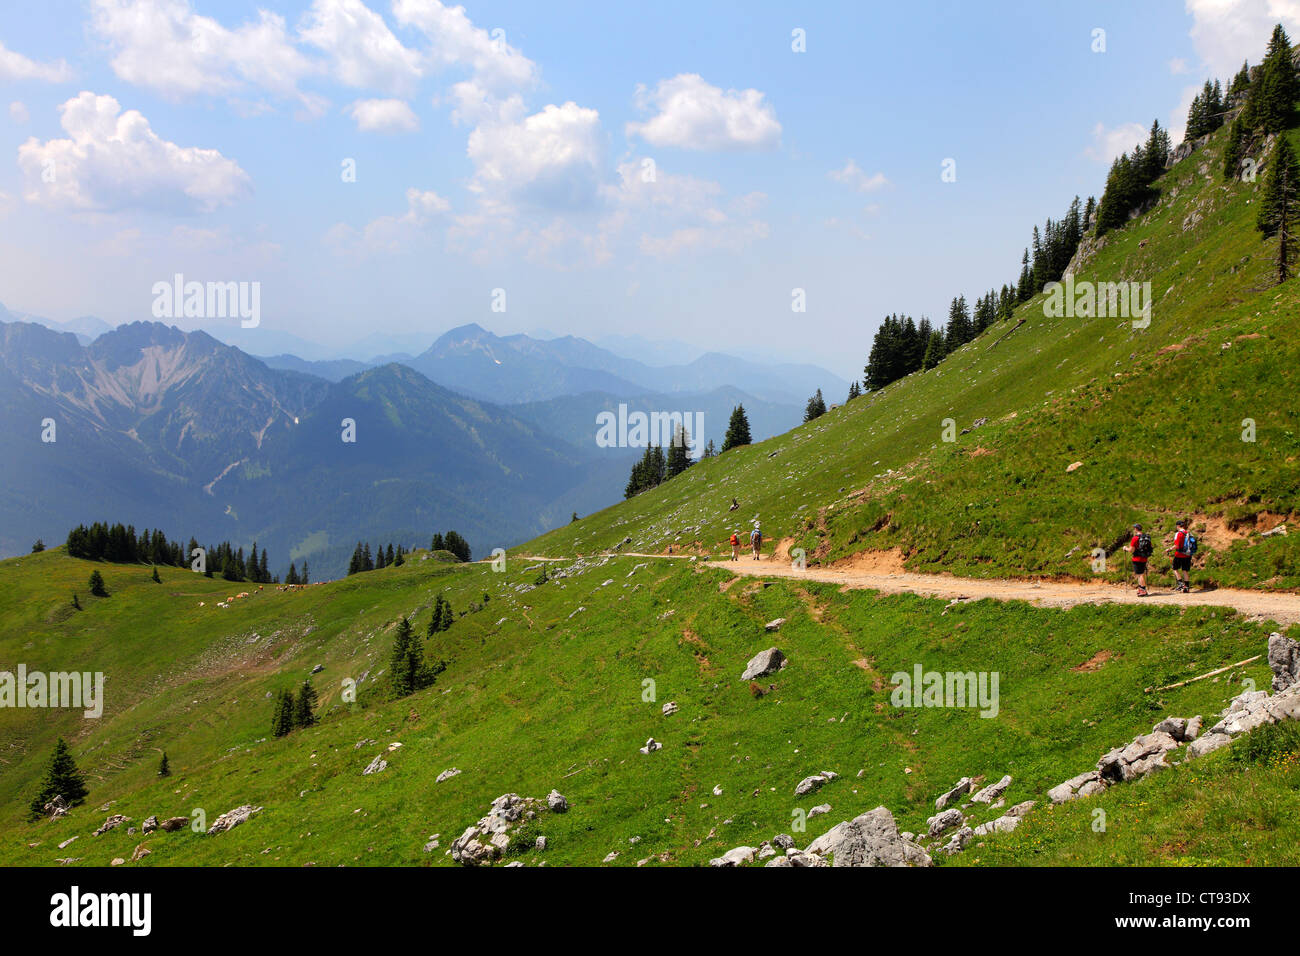 Mountain hiking path in the Mangfall mountains, Bavarian alps. Stock Photo